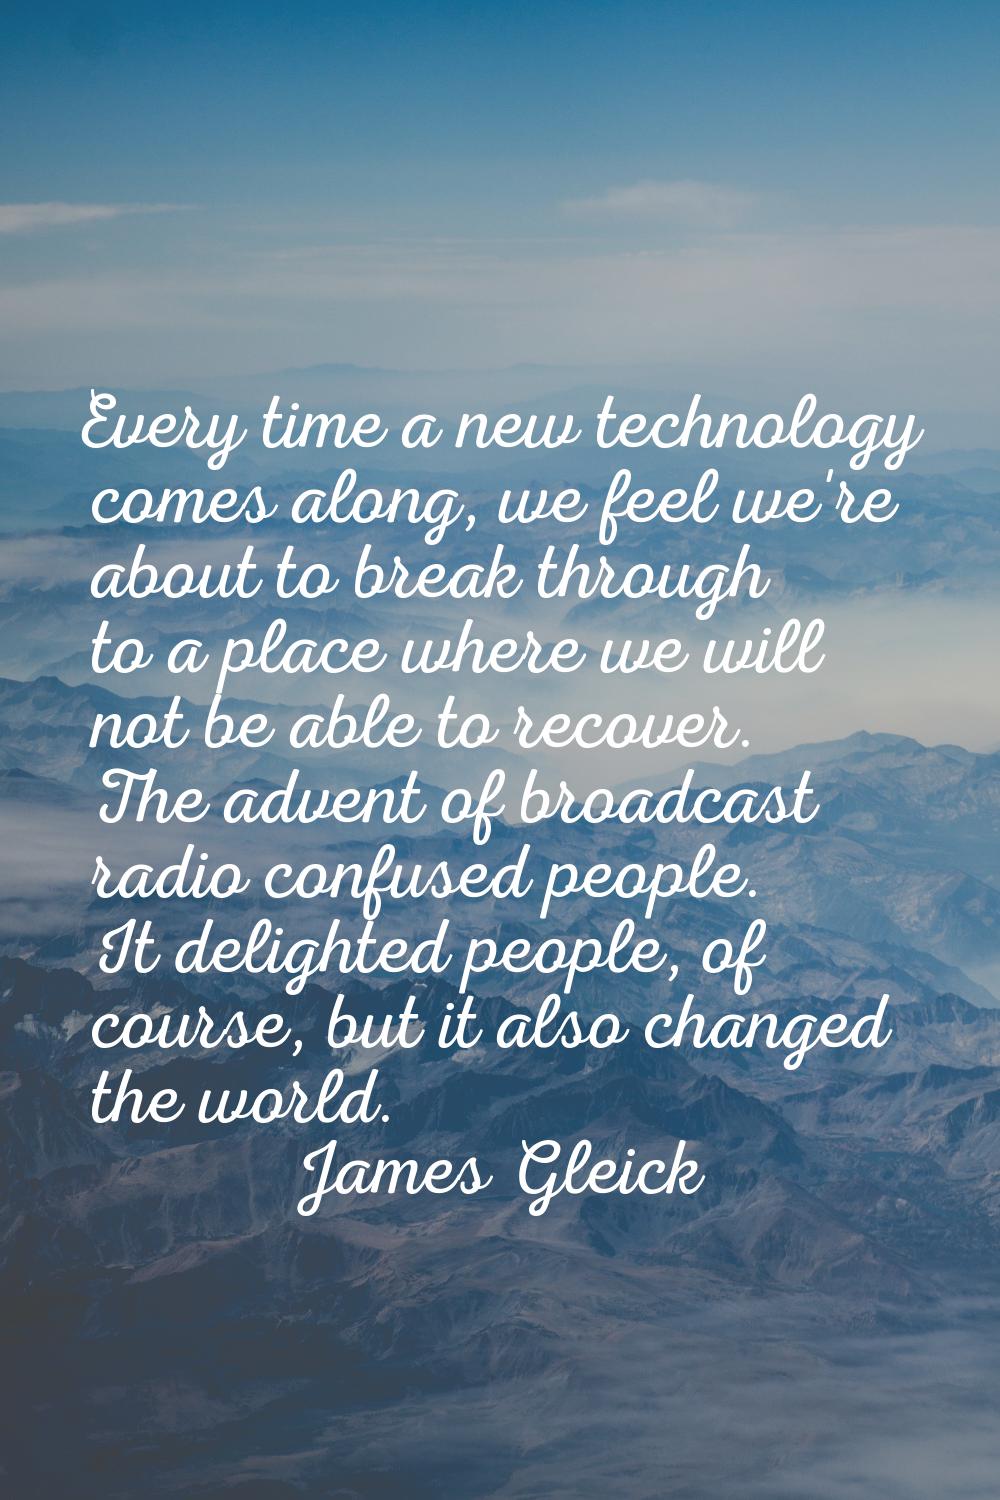 Every time a new technology comes along, we feel we're about to break through to a place where we w